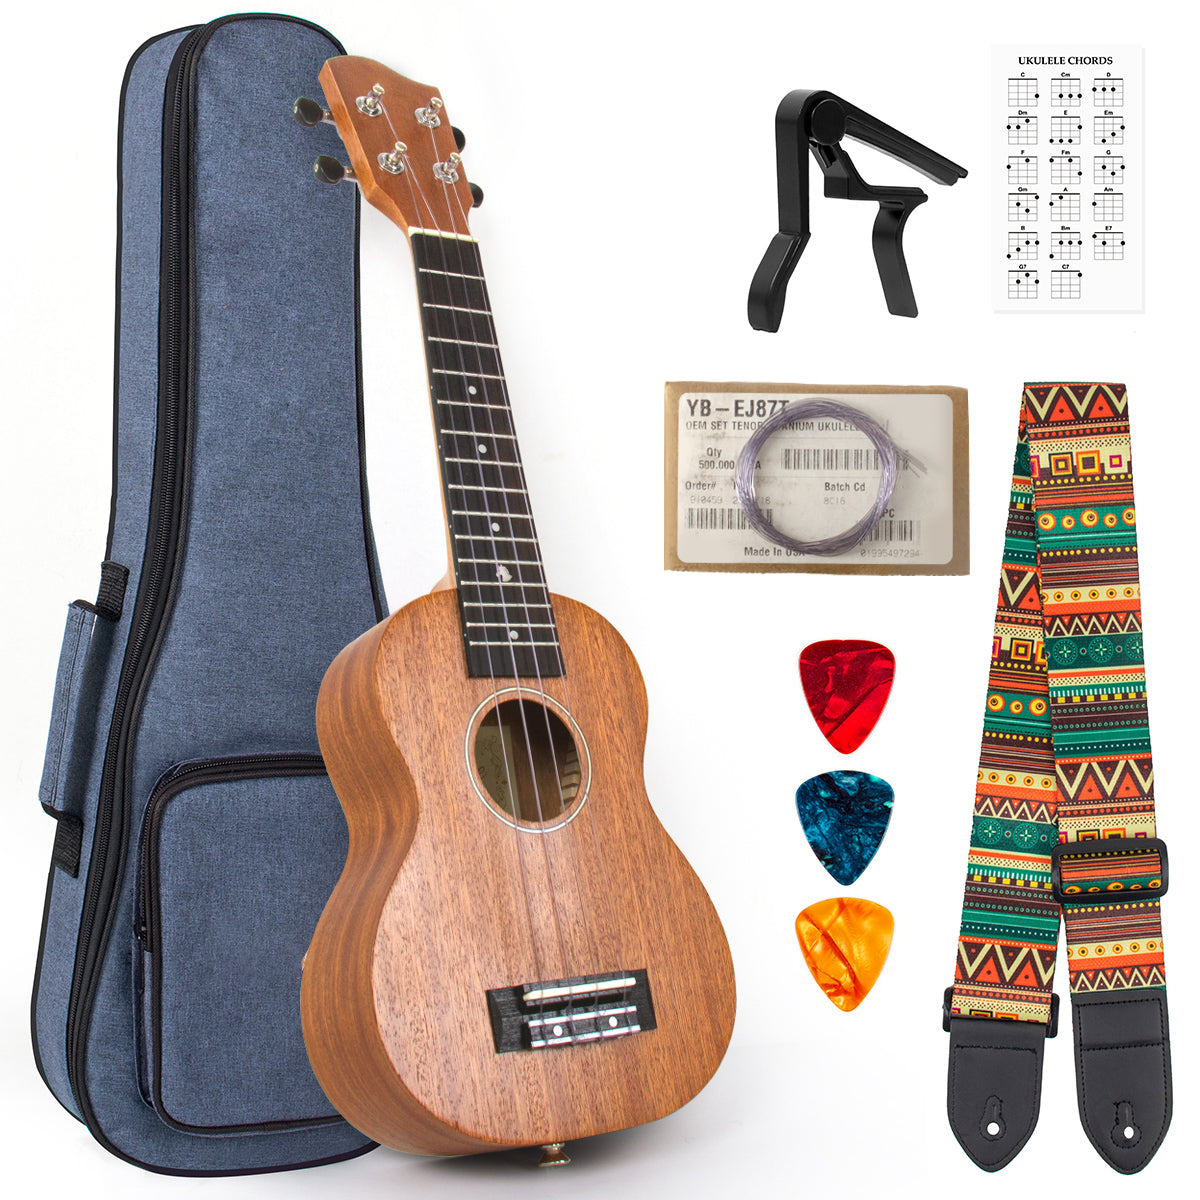 JDR Soprano Ukulele Professional Mahogany 21 Inch Small Hawaiian Guitar with Carbon Strings Protective Bag and Beginners Manual for Children Adults 